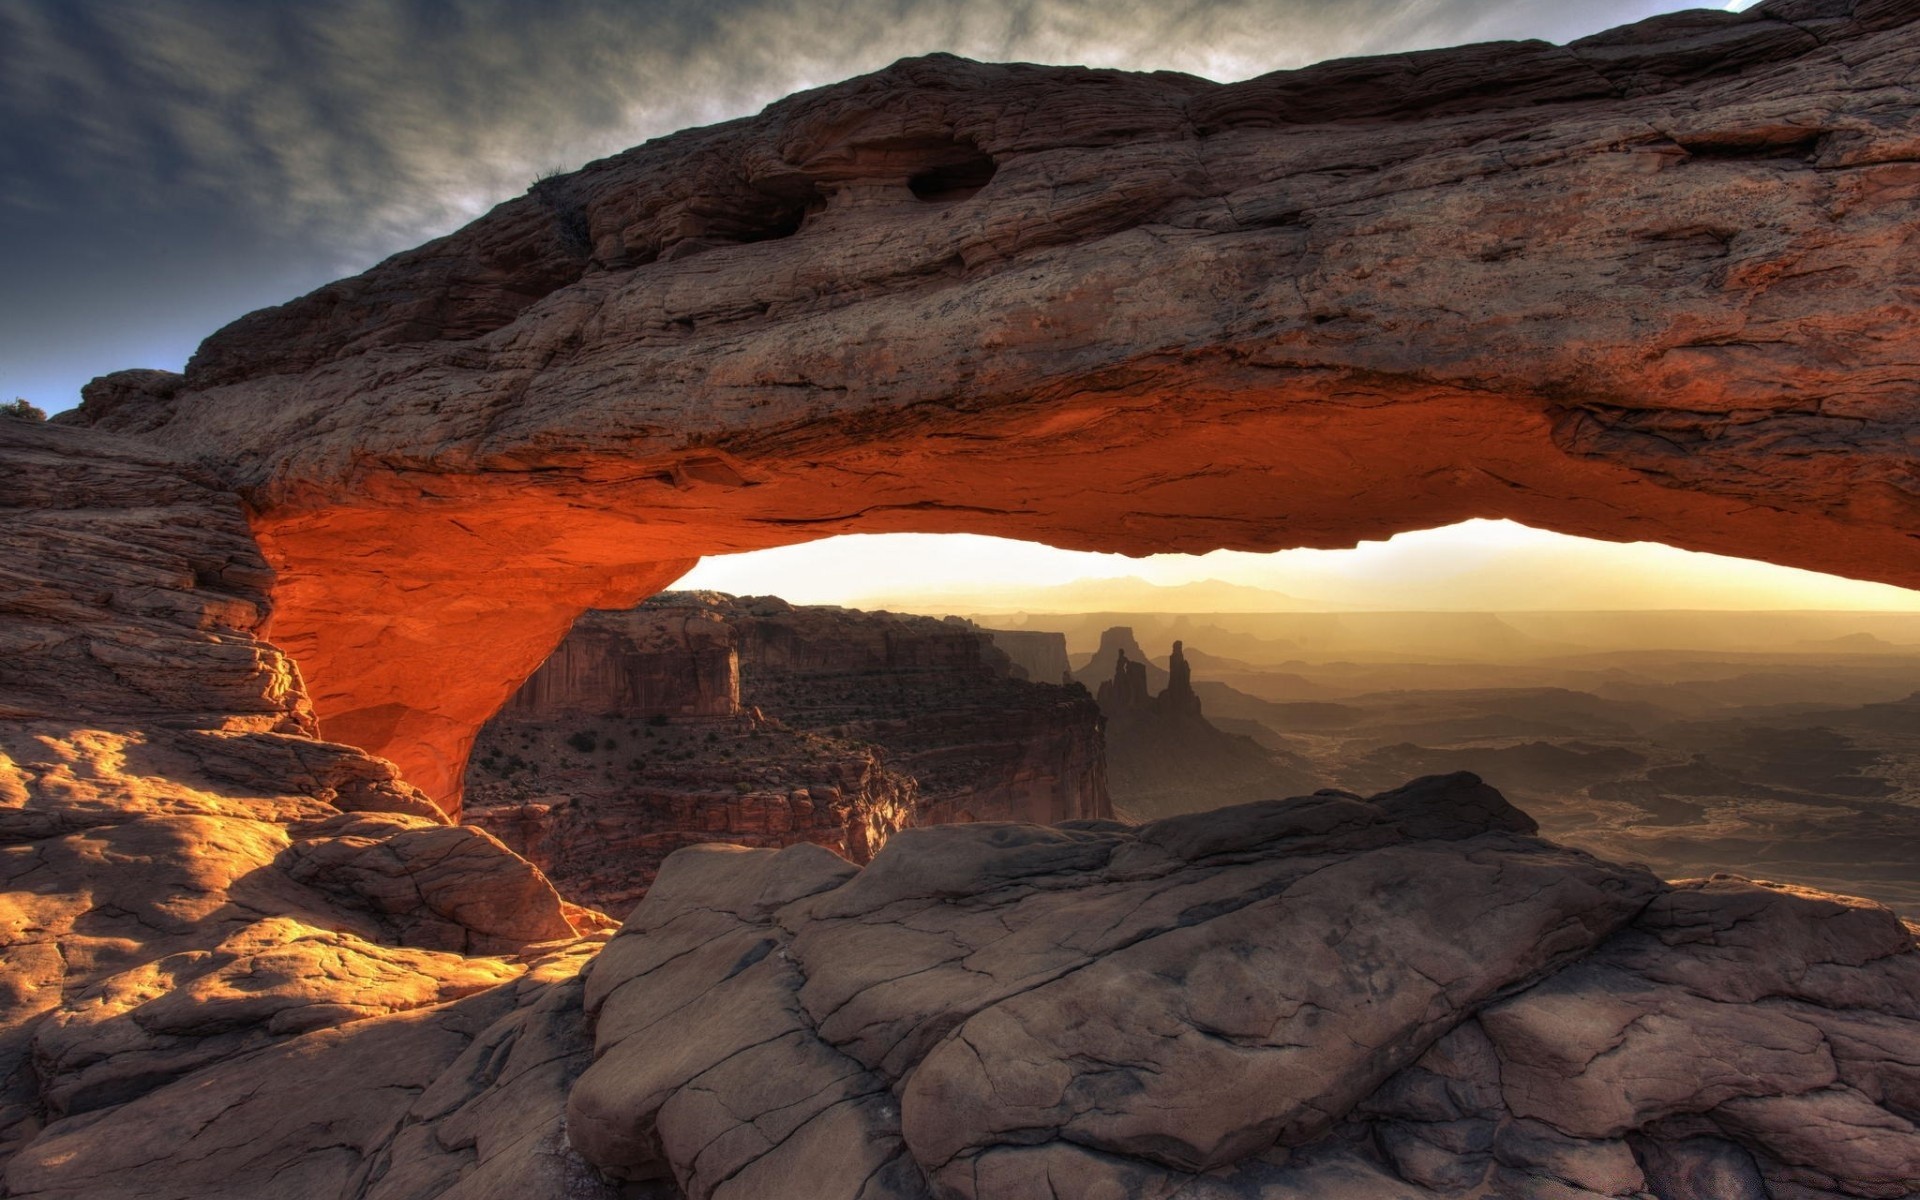 america sunset desert rock landscape travel geology dawn outdoors sandstone scenic evening mountain nature canyon pinnacle sky remote valley dry